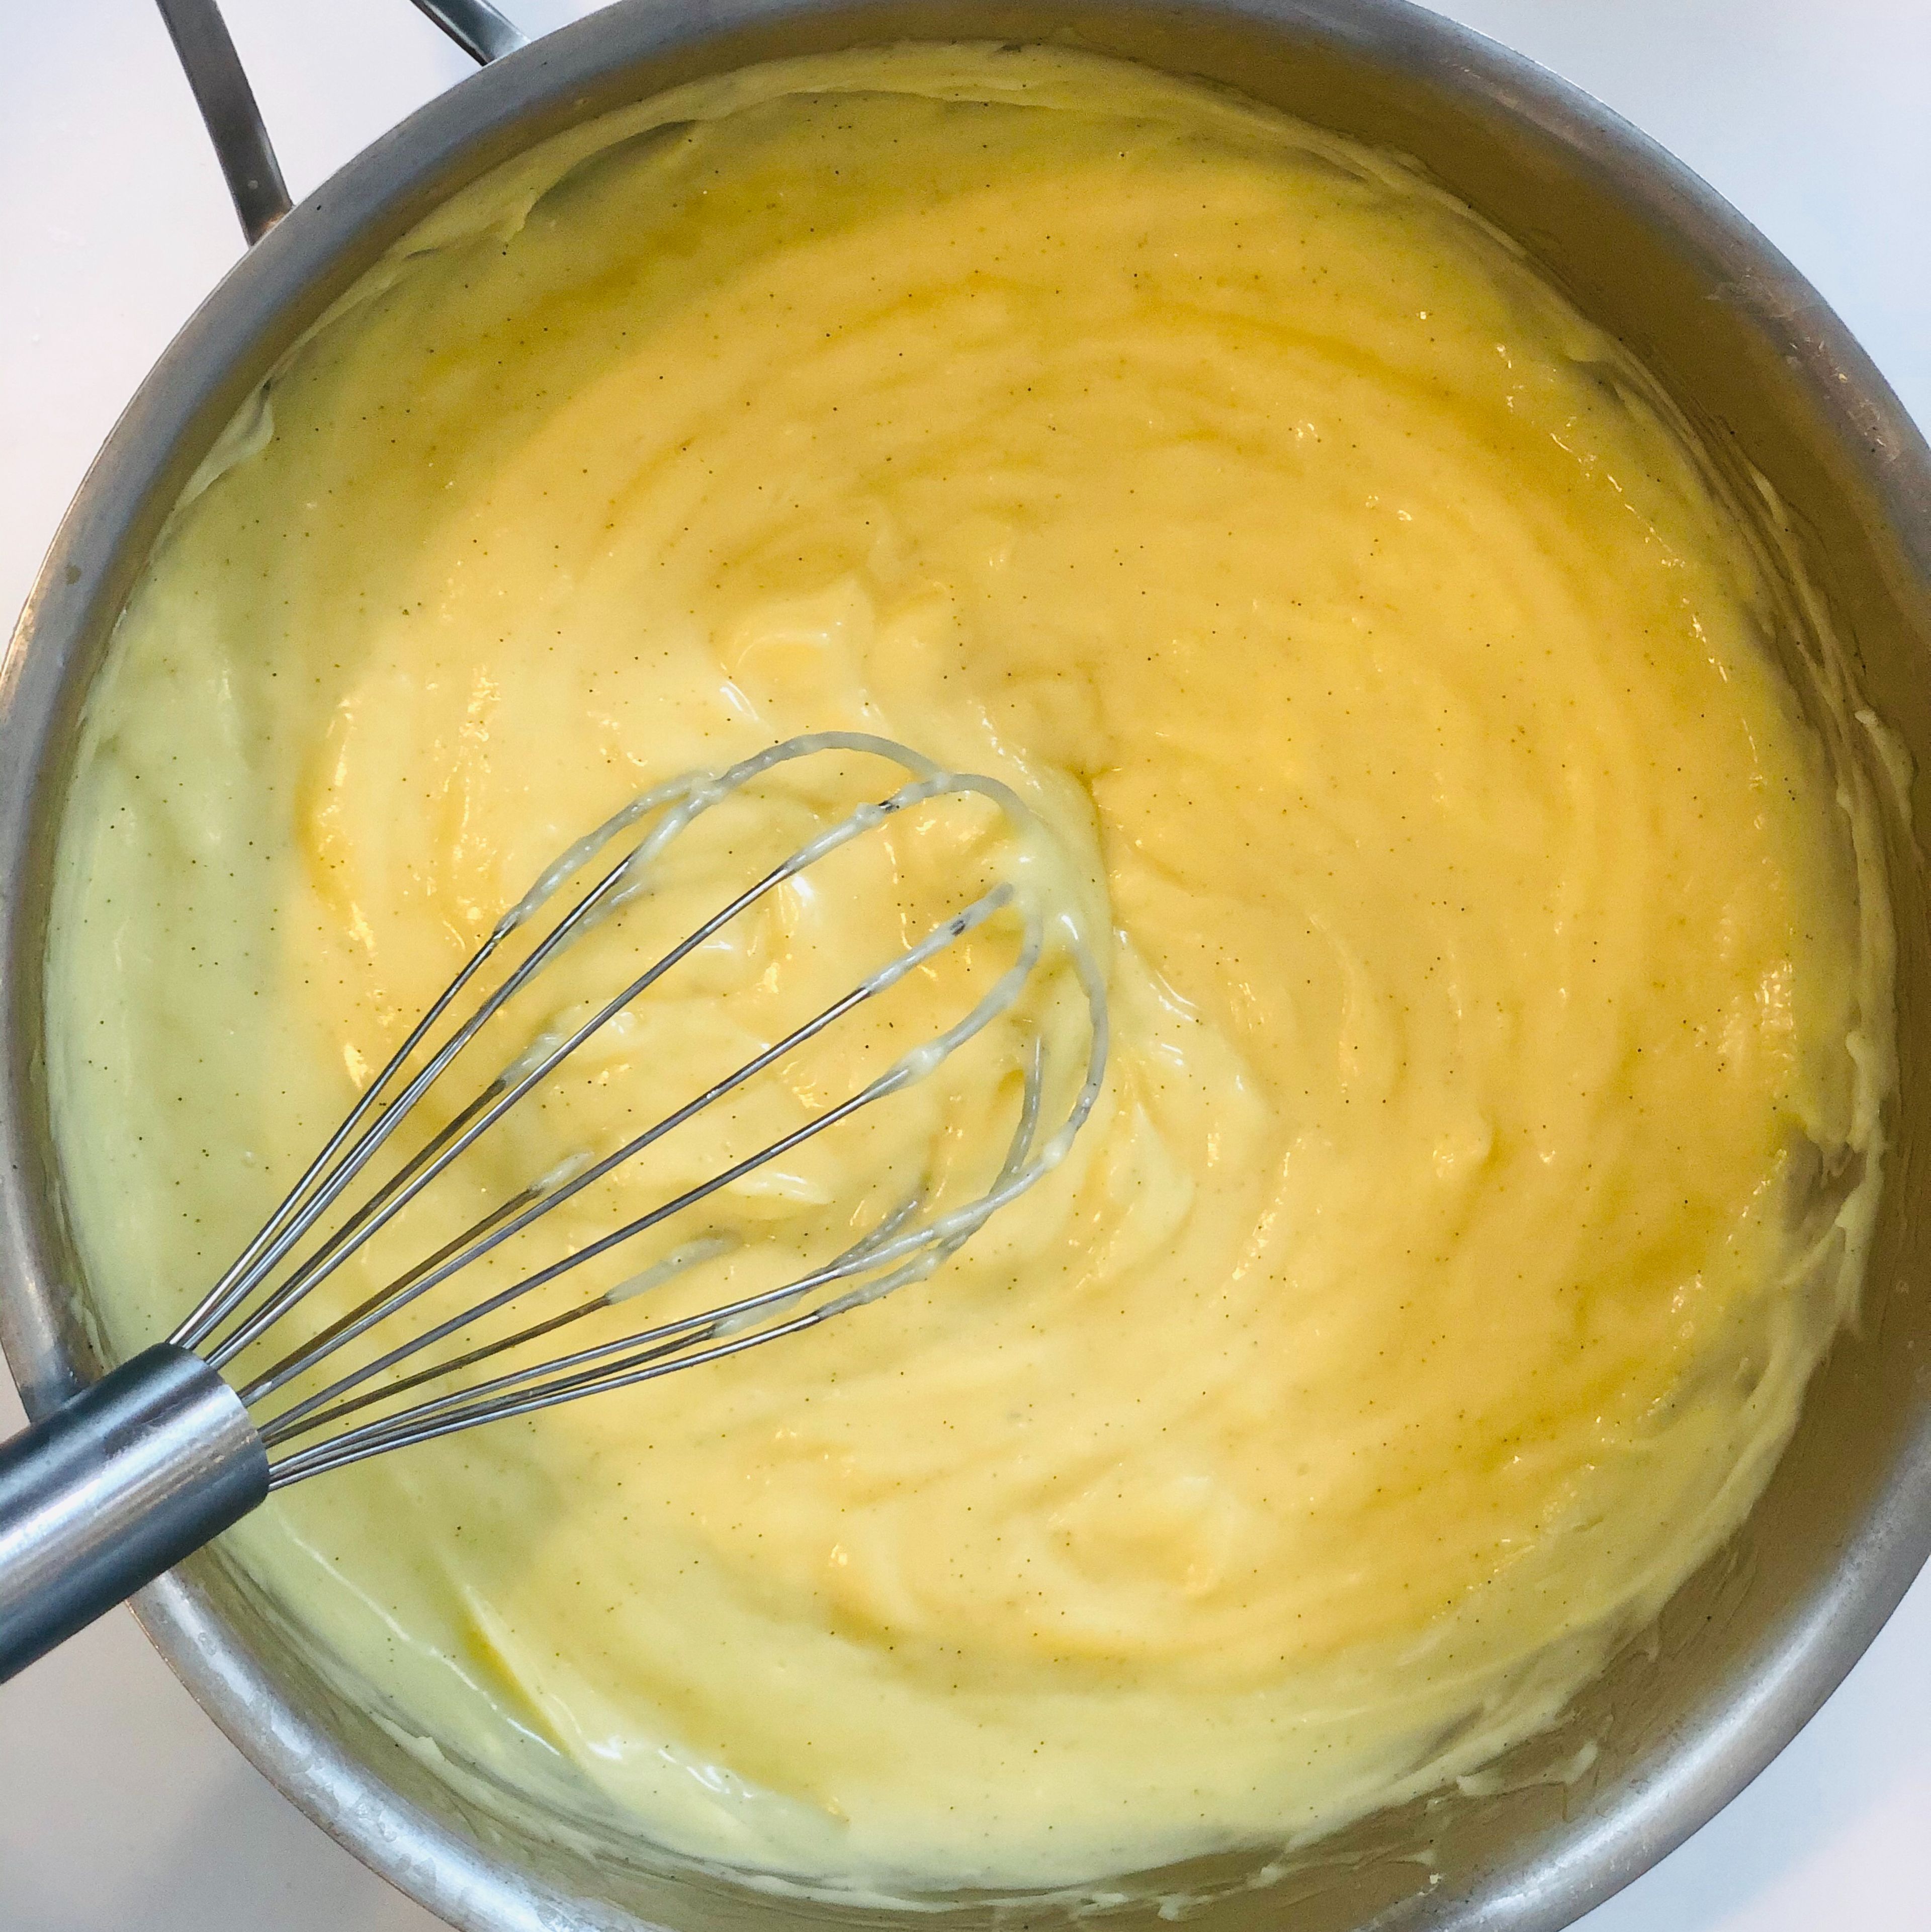 For the pastry cream, heat the milk in a medium sized saucepan over medium heat. Meanwhile whisk the egg yolks, sugar, salt, and cornstarch in a bowl. Pour about a cup of the heated milk inti the egg mixture to temper them, then return the entire thing to medium low heat. Whisk until a thick cream is formed, then turn off the heat. Add butter and vanilla and chill, covered tightly until use.